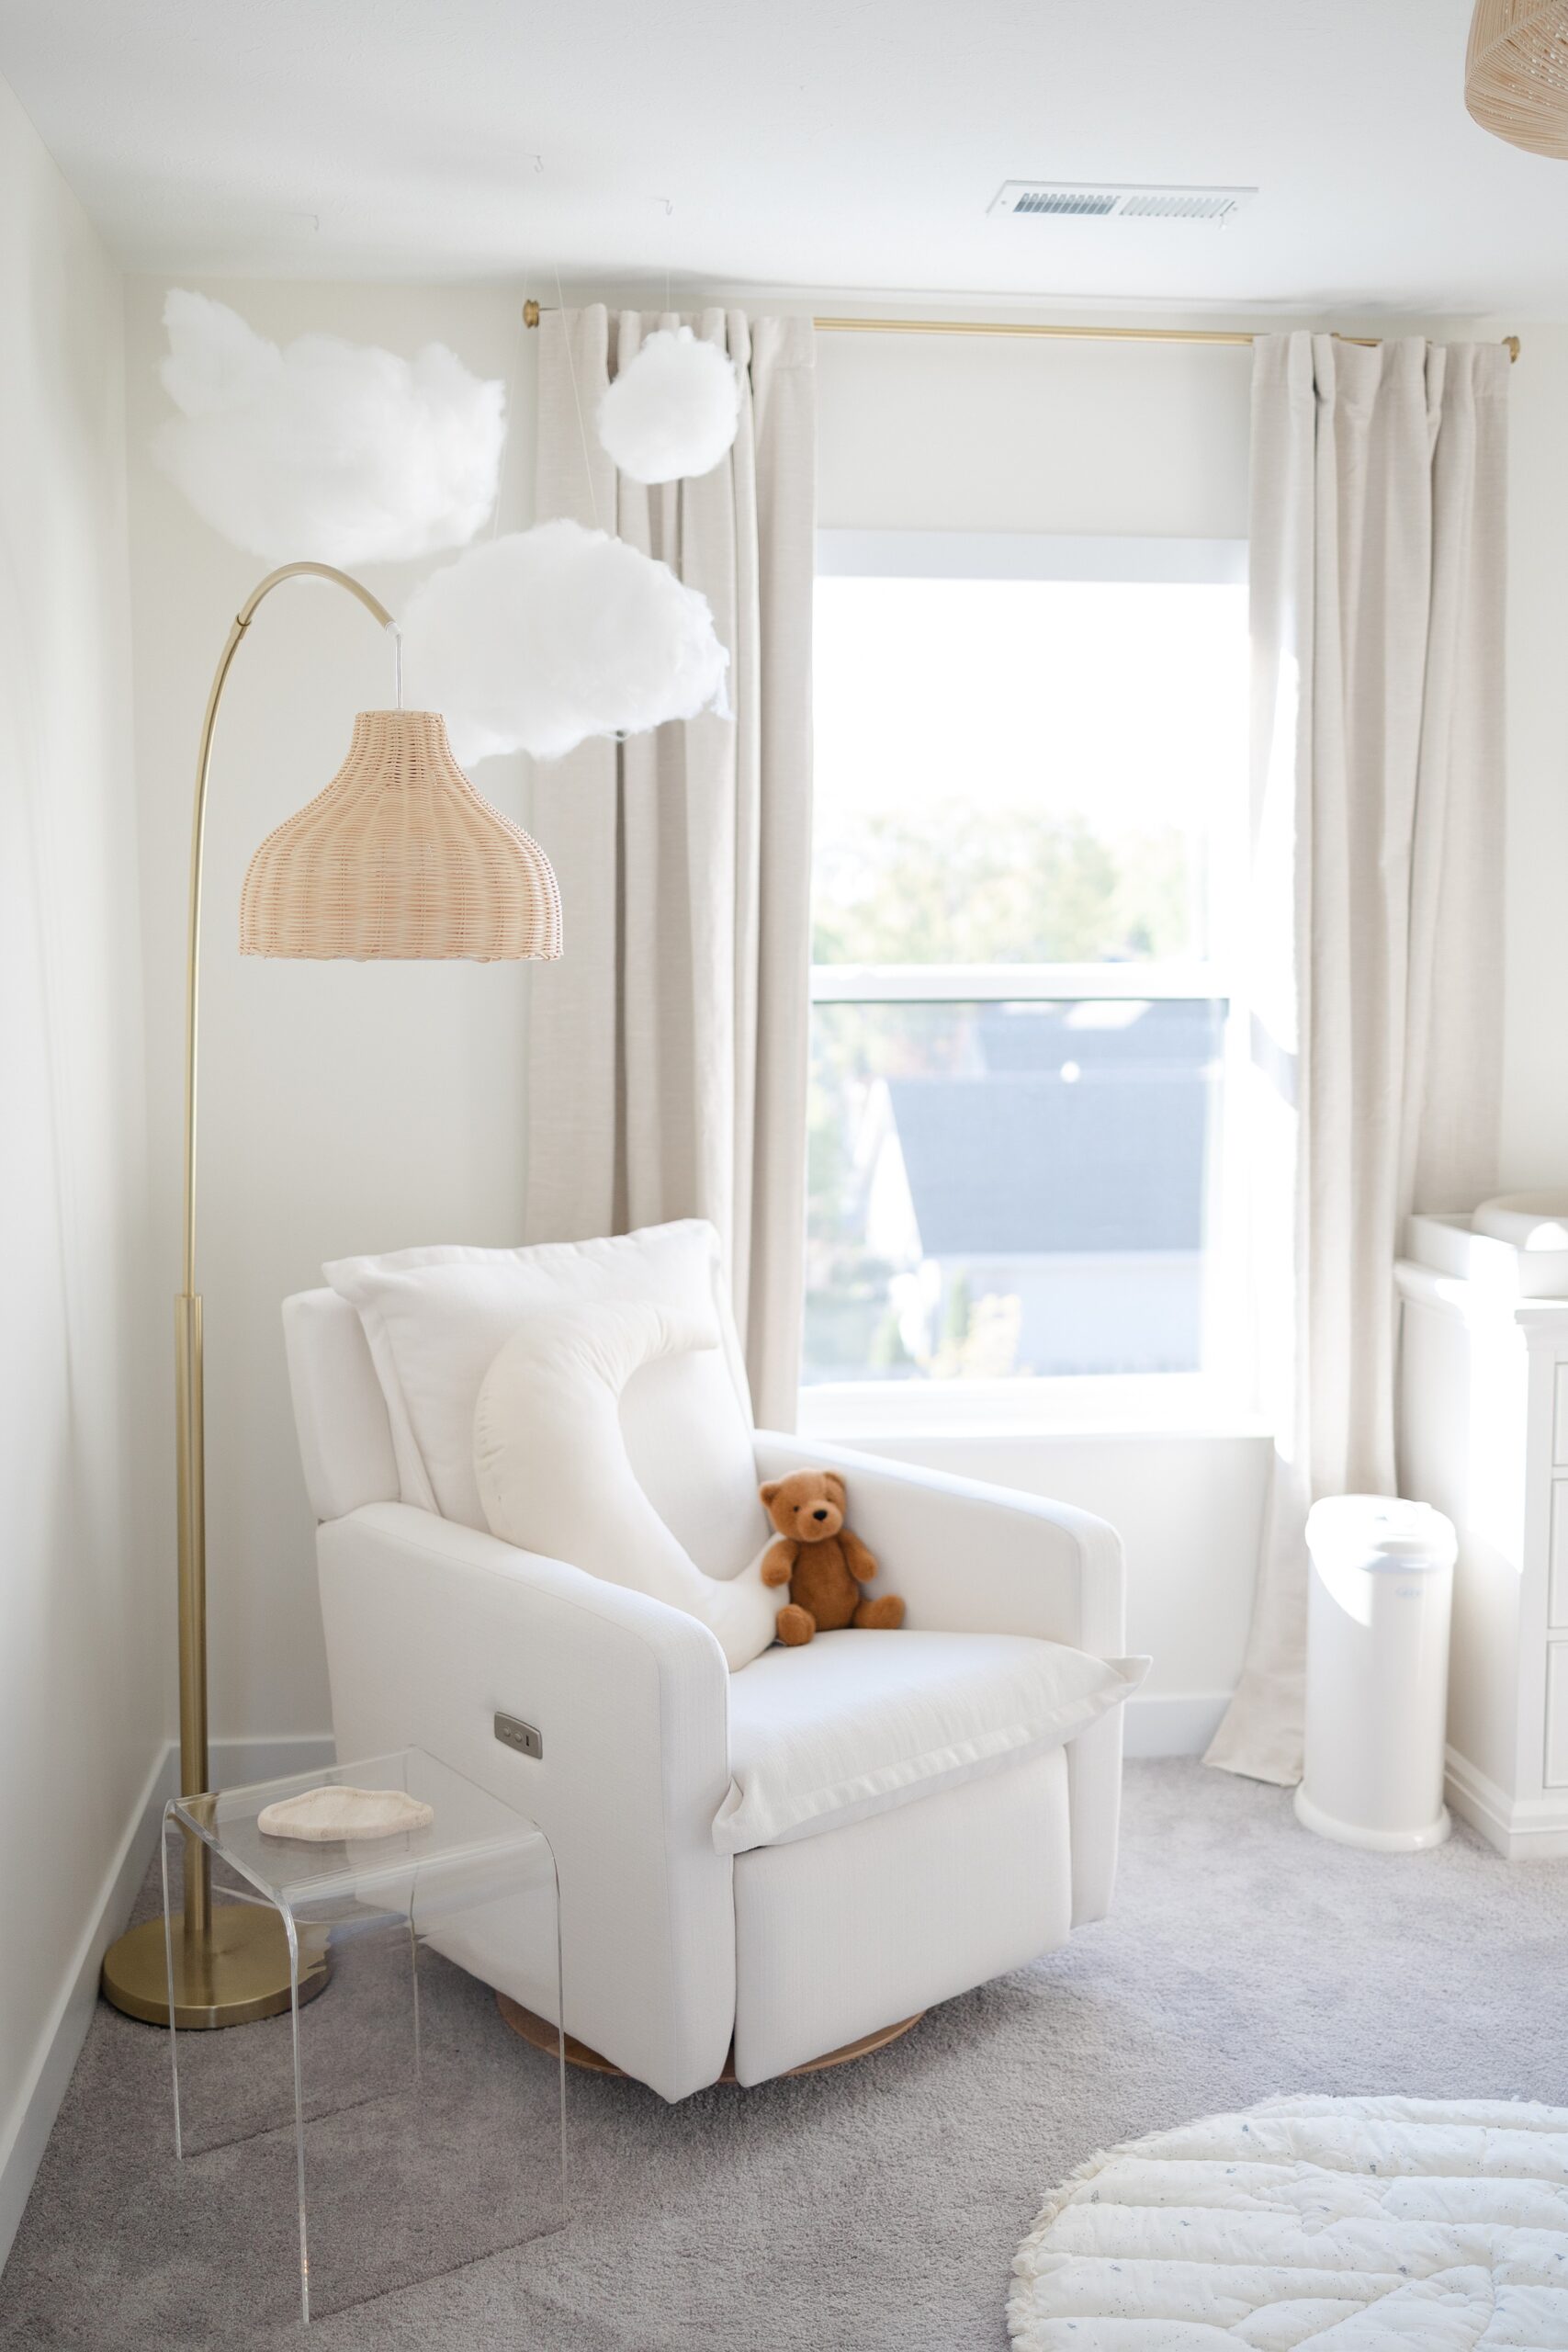 A view of a modern styled nursery with white chair and grey carpet